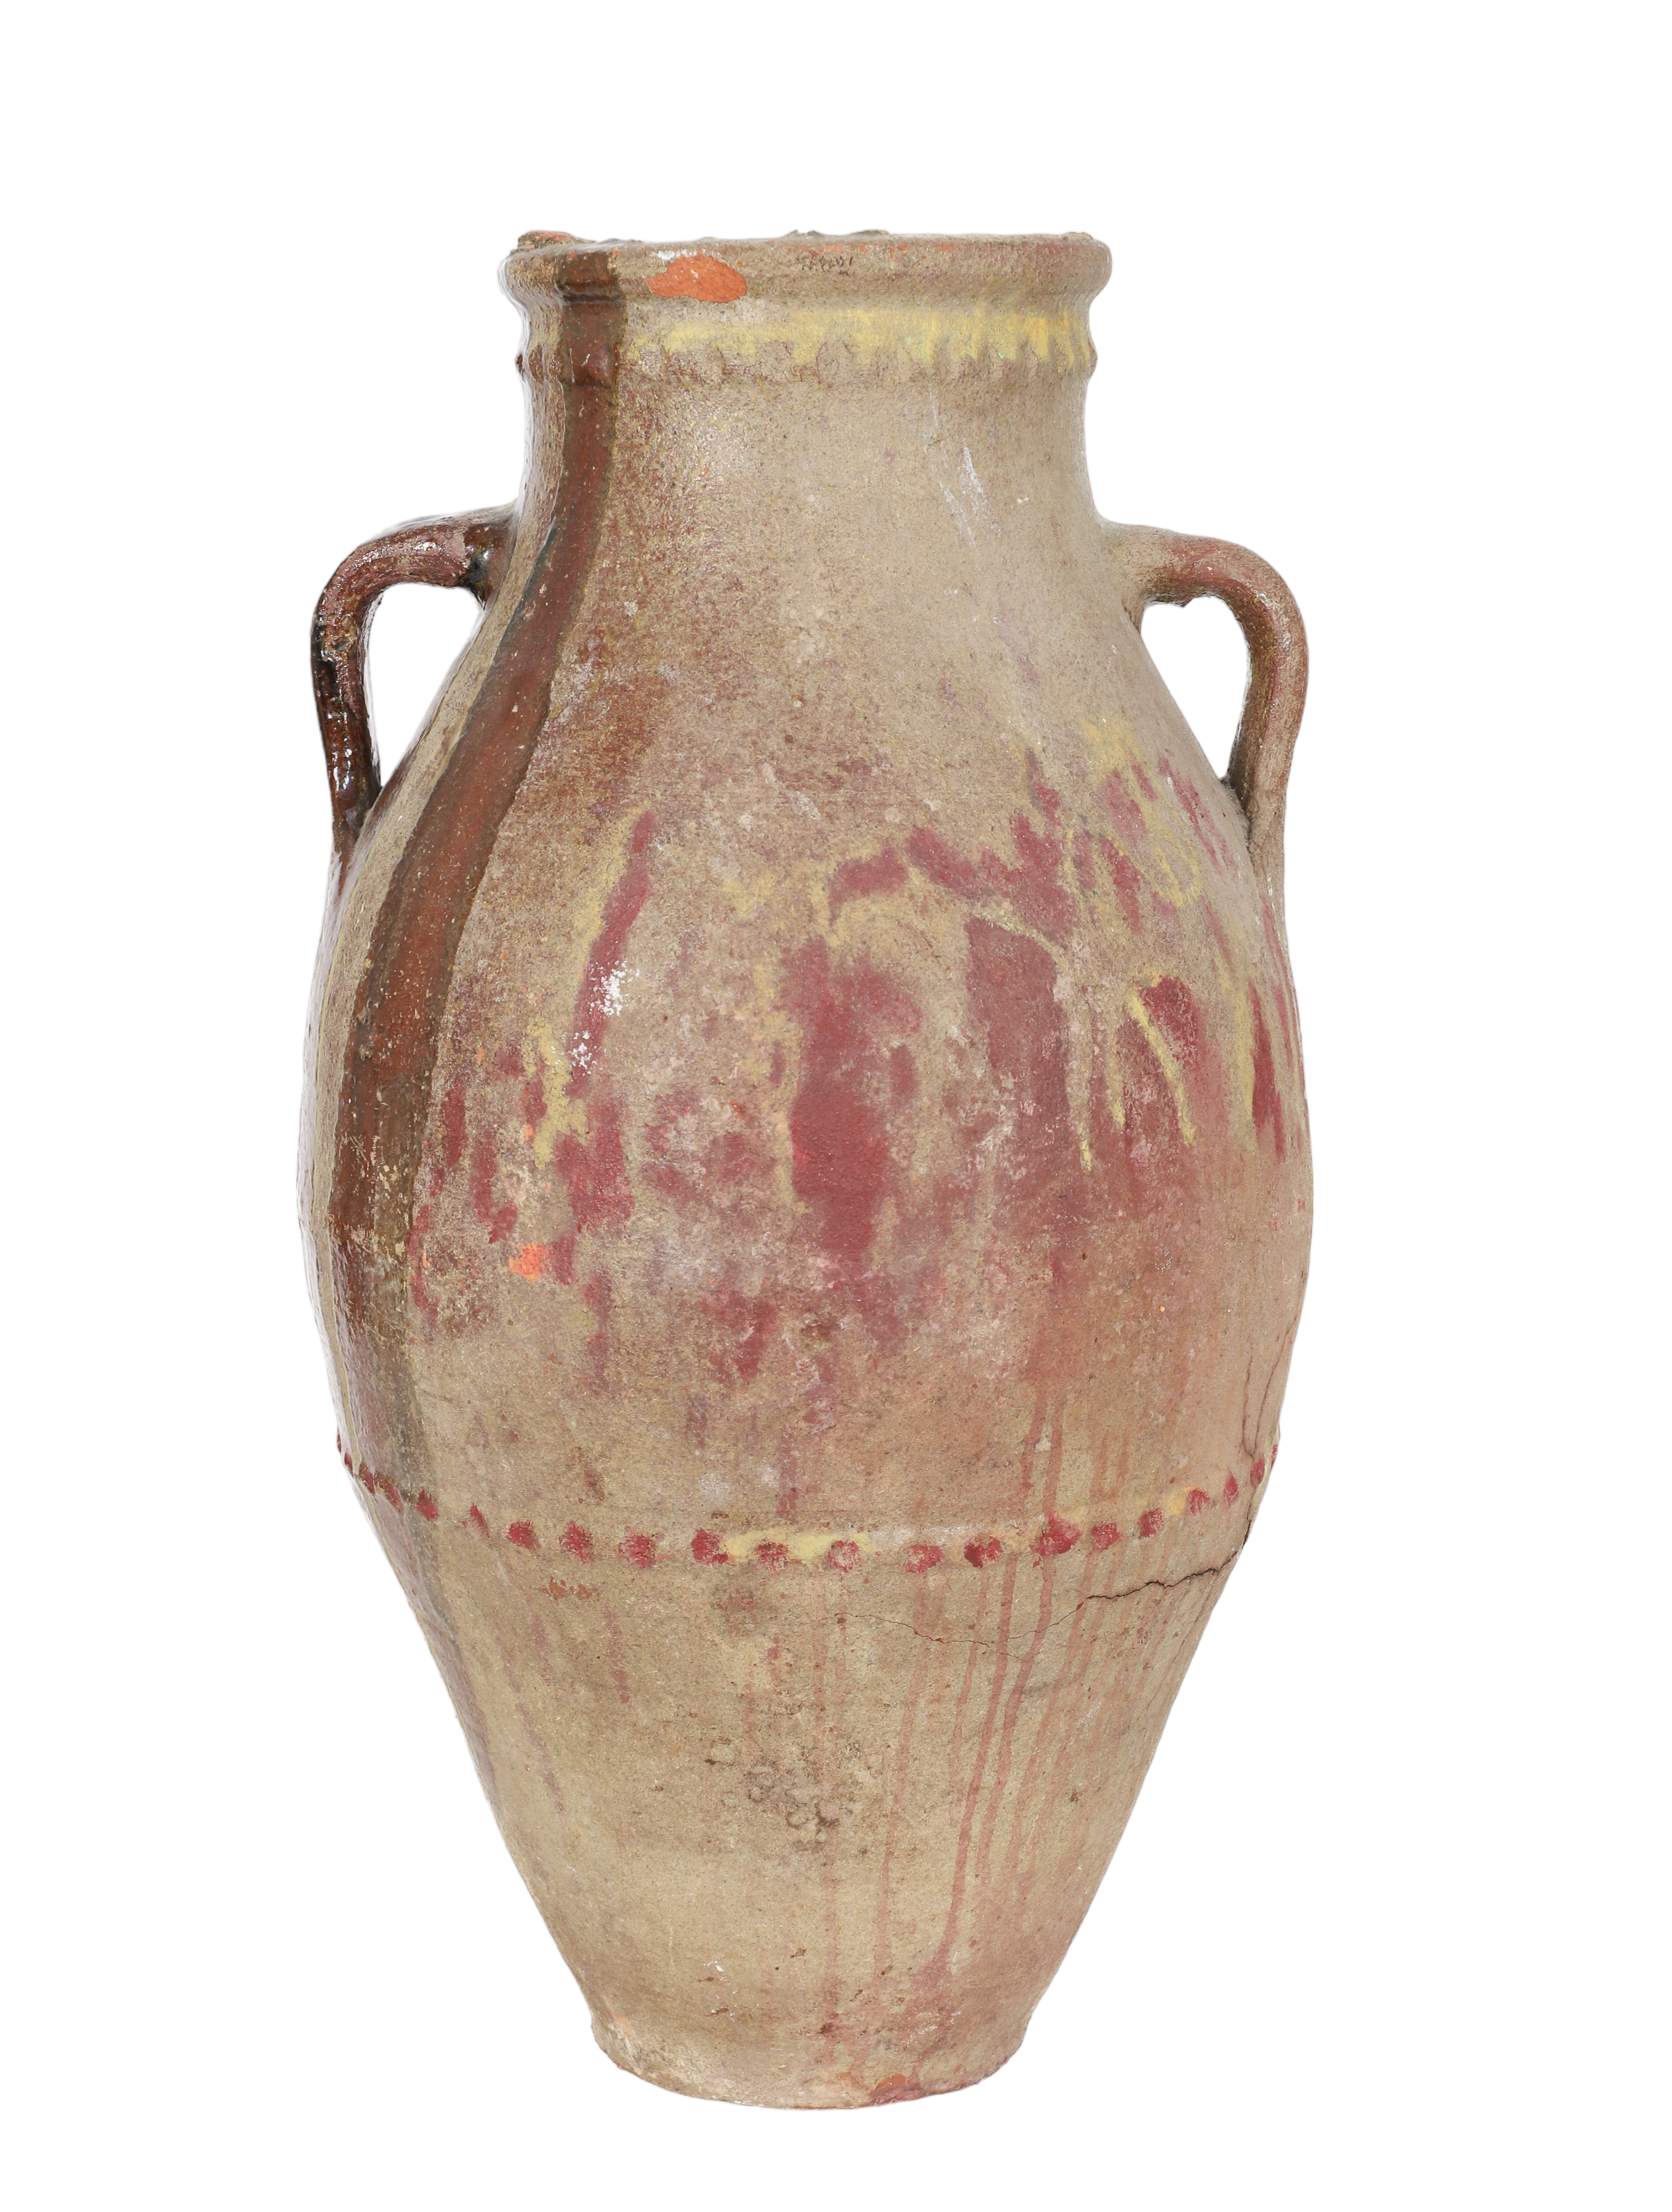 Large redware pottery urn, made in Turkey,